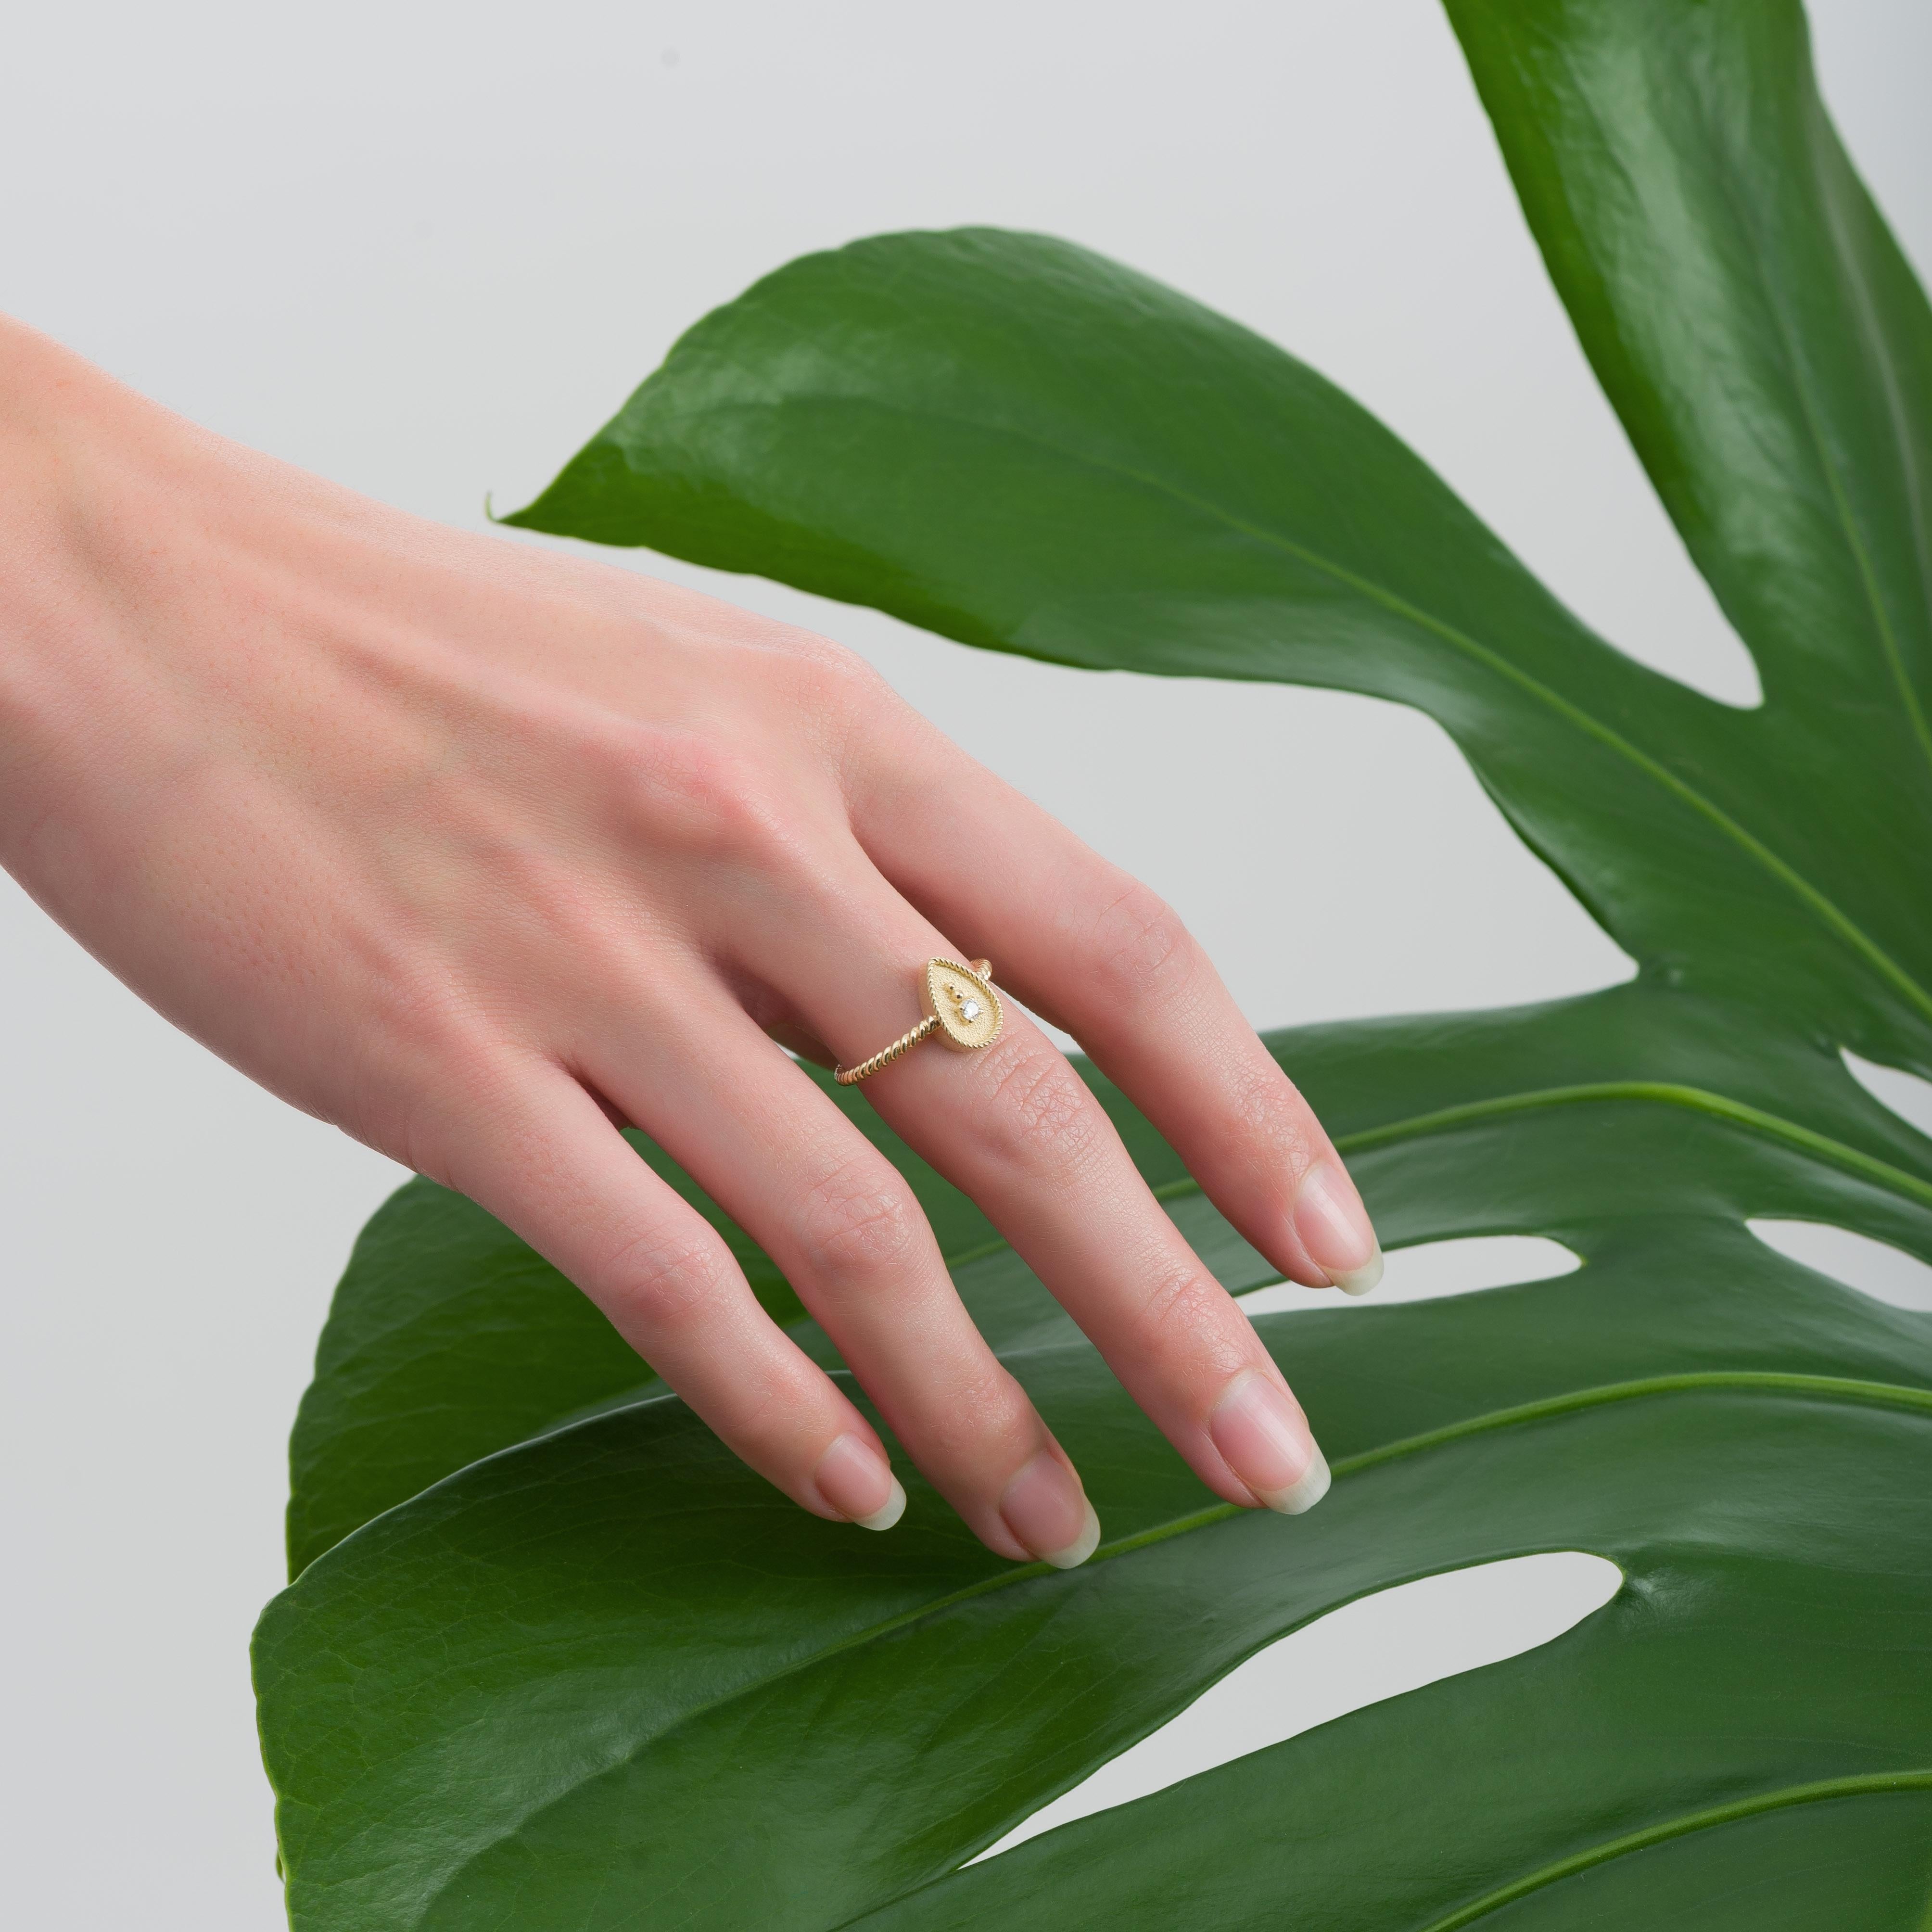 Our Gold Rope Ring with a Graceful Pear Design and a Brilliant Diamond Centerpiece—an exquisite blend of classic charm and contemporary sophistication, making a statement that's both timeless and modern.

100% handmade in our workshop.

Metal: 18K